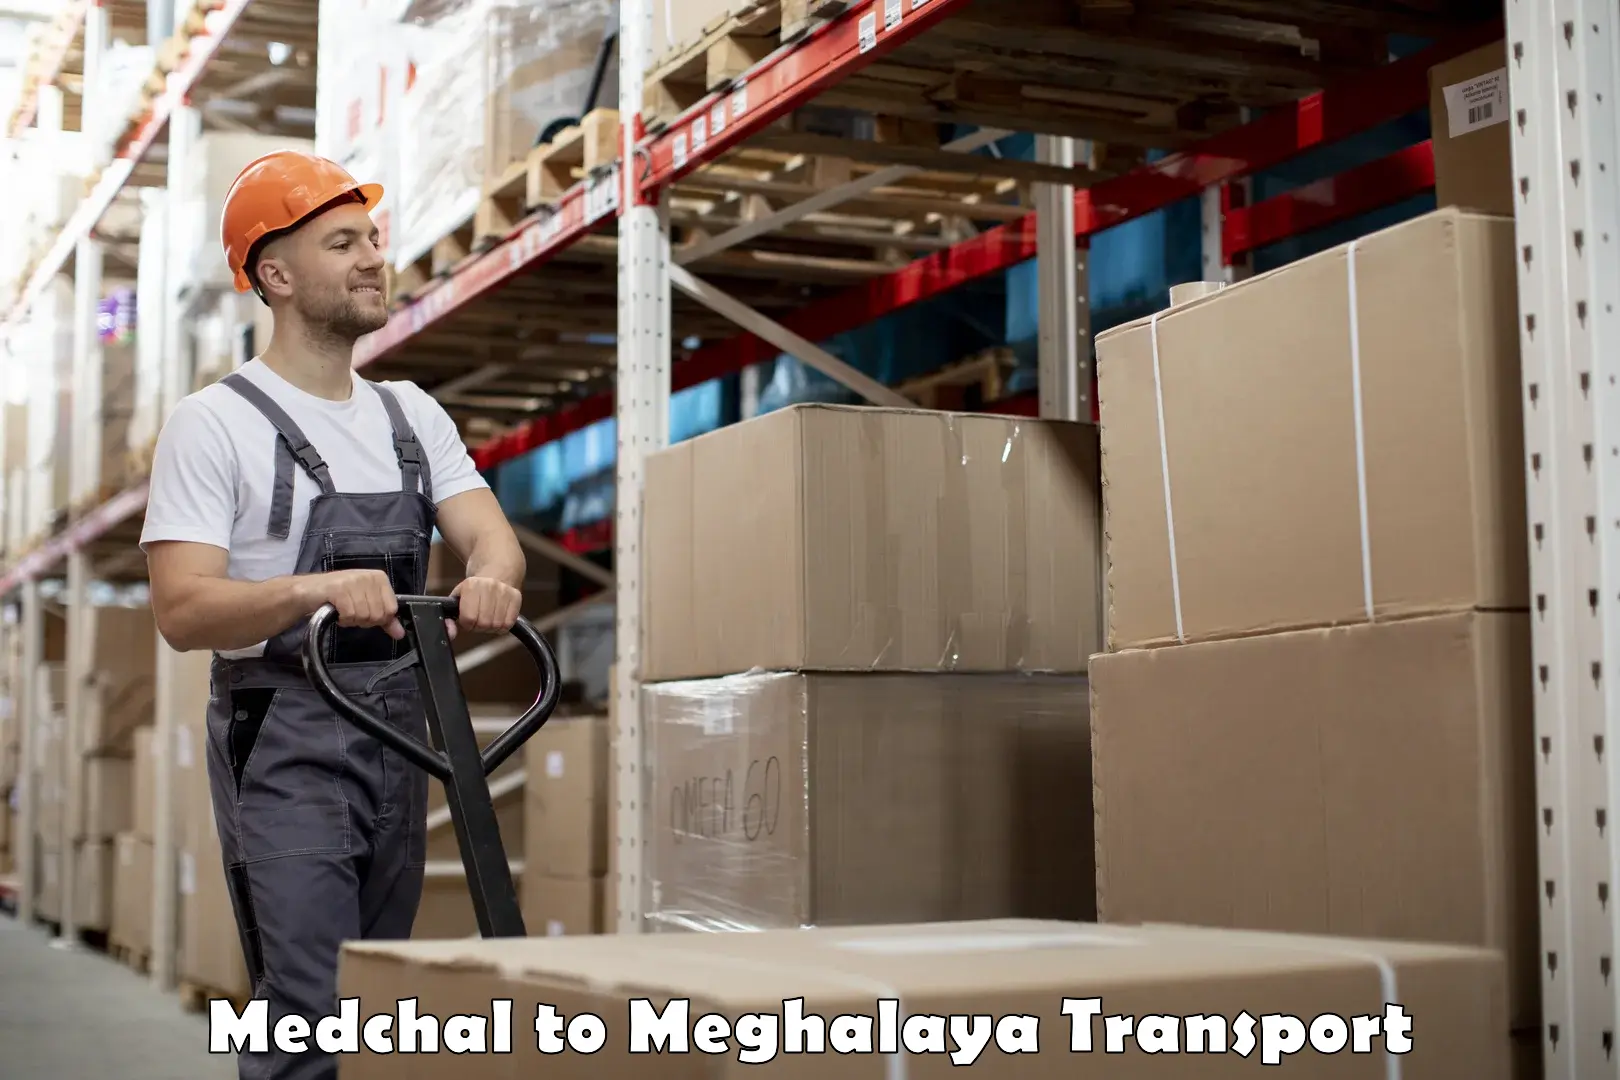 Lorry transport service Medchal to Shillong